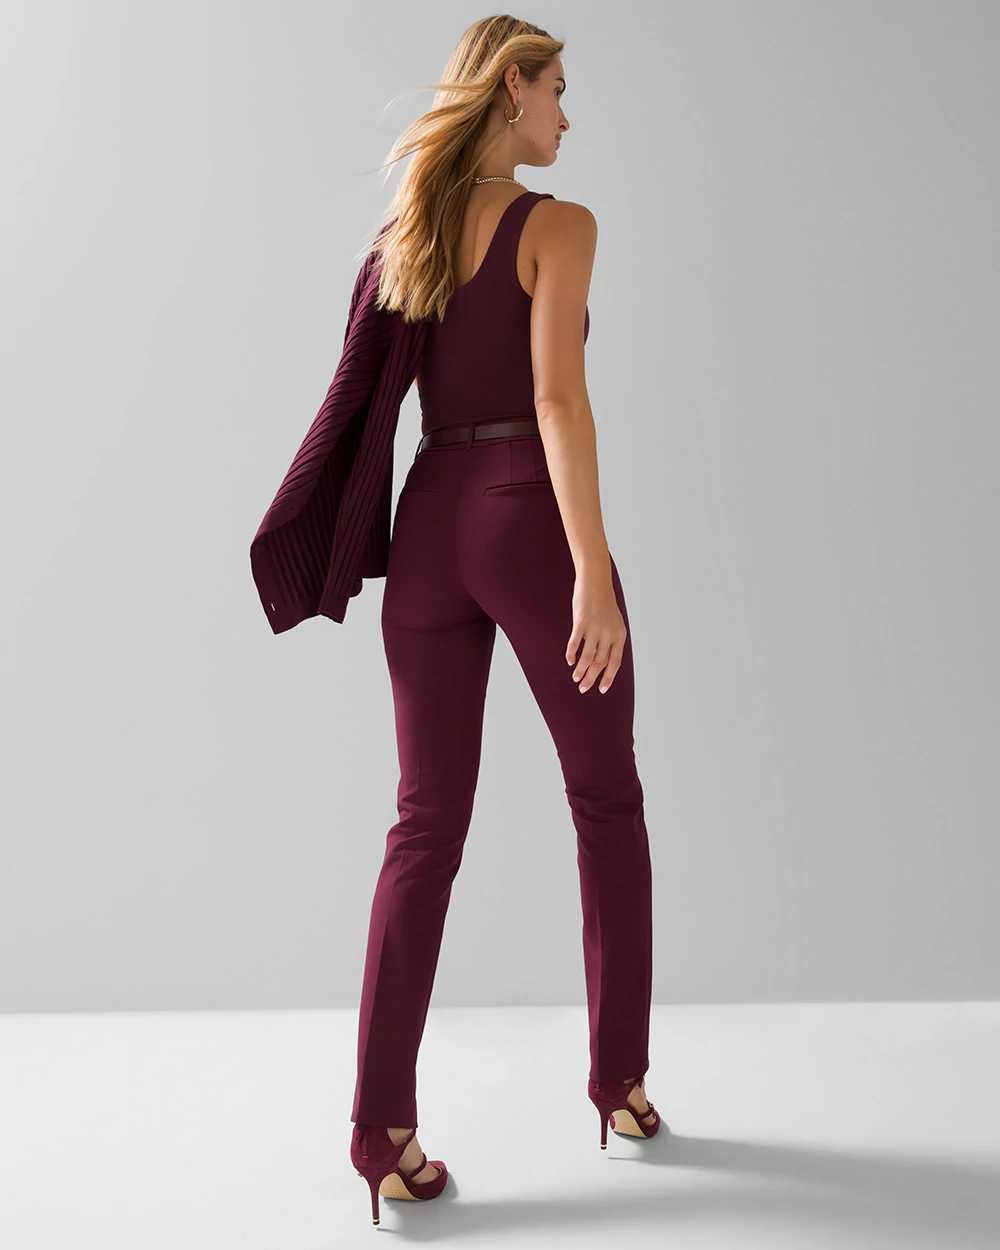 Petite WHBM® Elle Slim Trouser Comfort Stretch Pant click to view larger image.